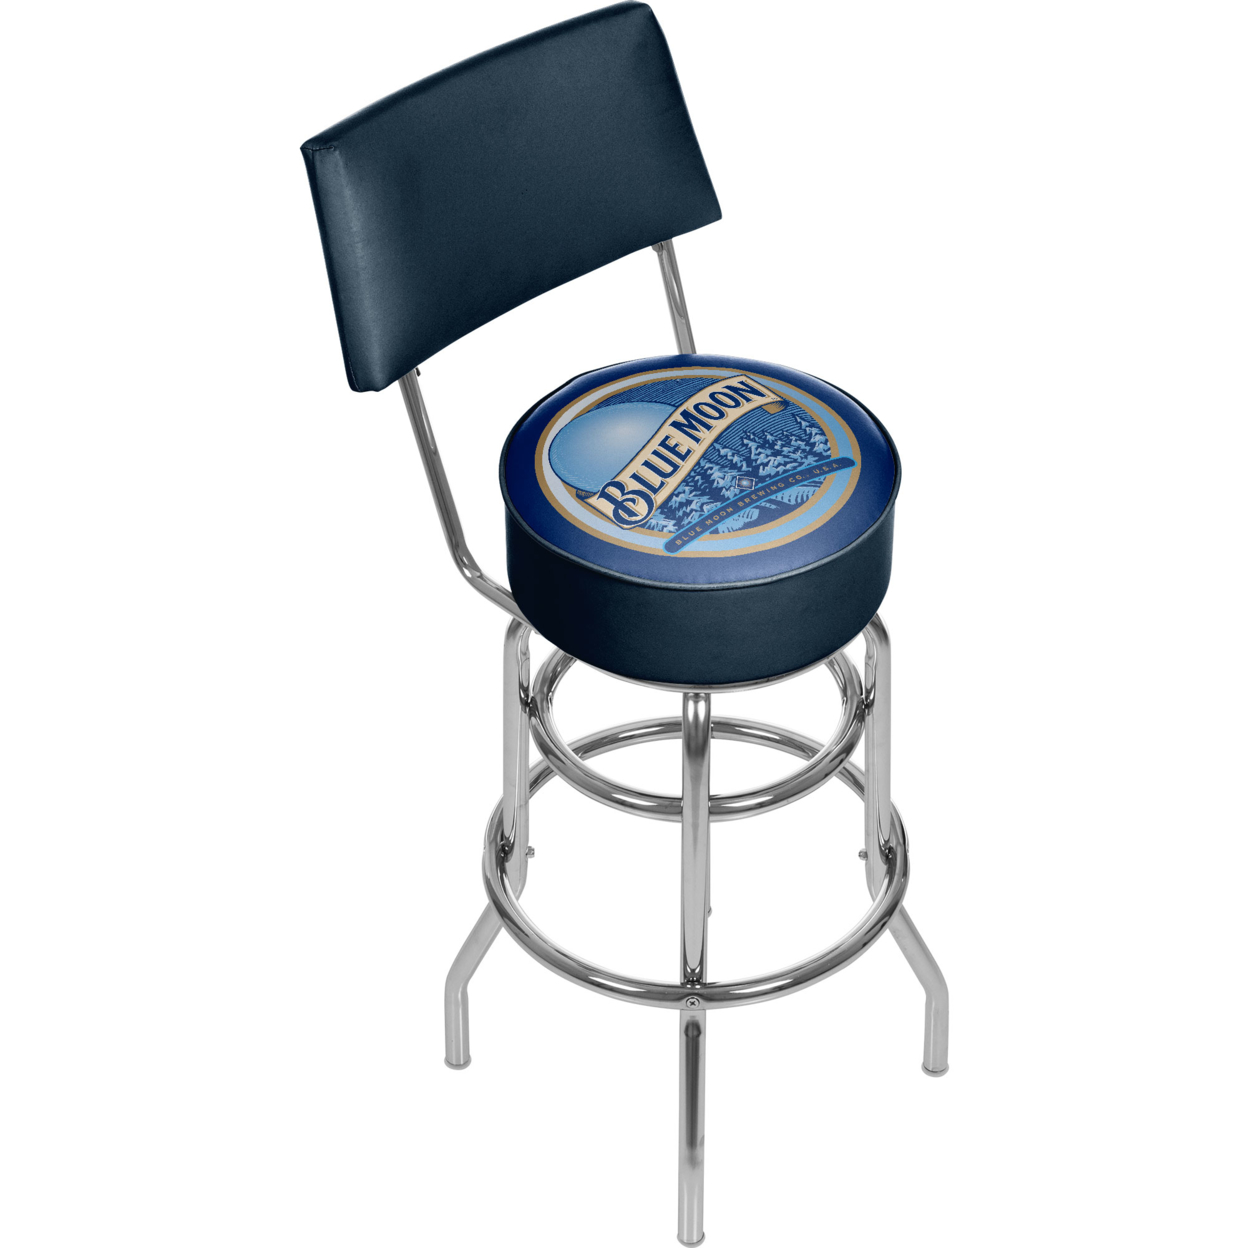 ADG Source Blue Moon Padded Swivel Bar Stool with Back